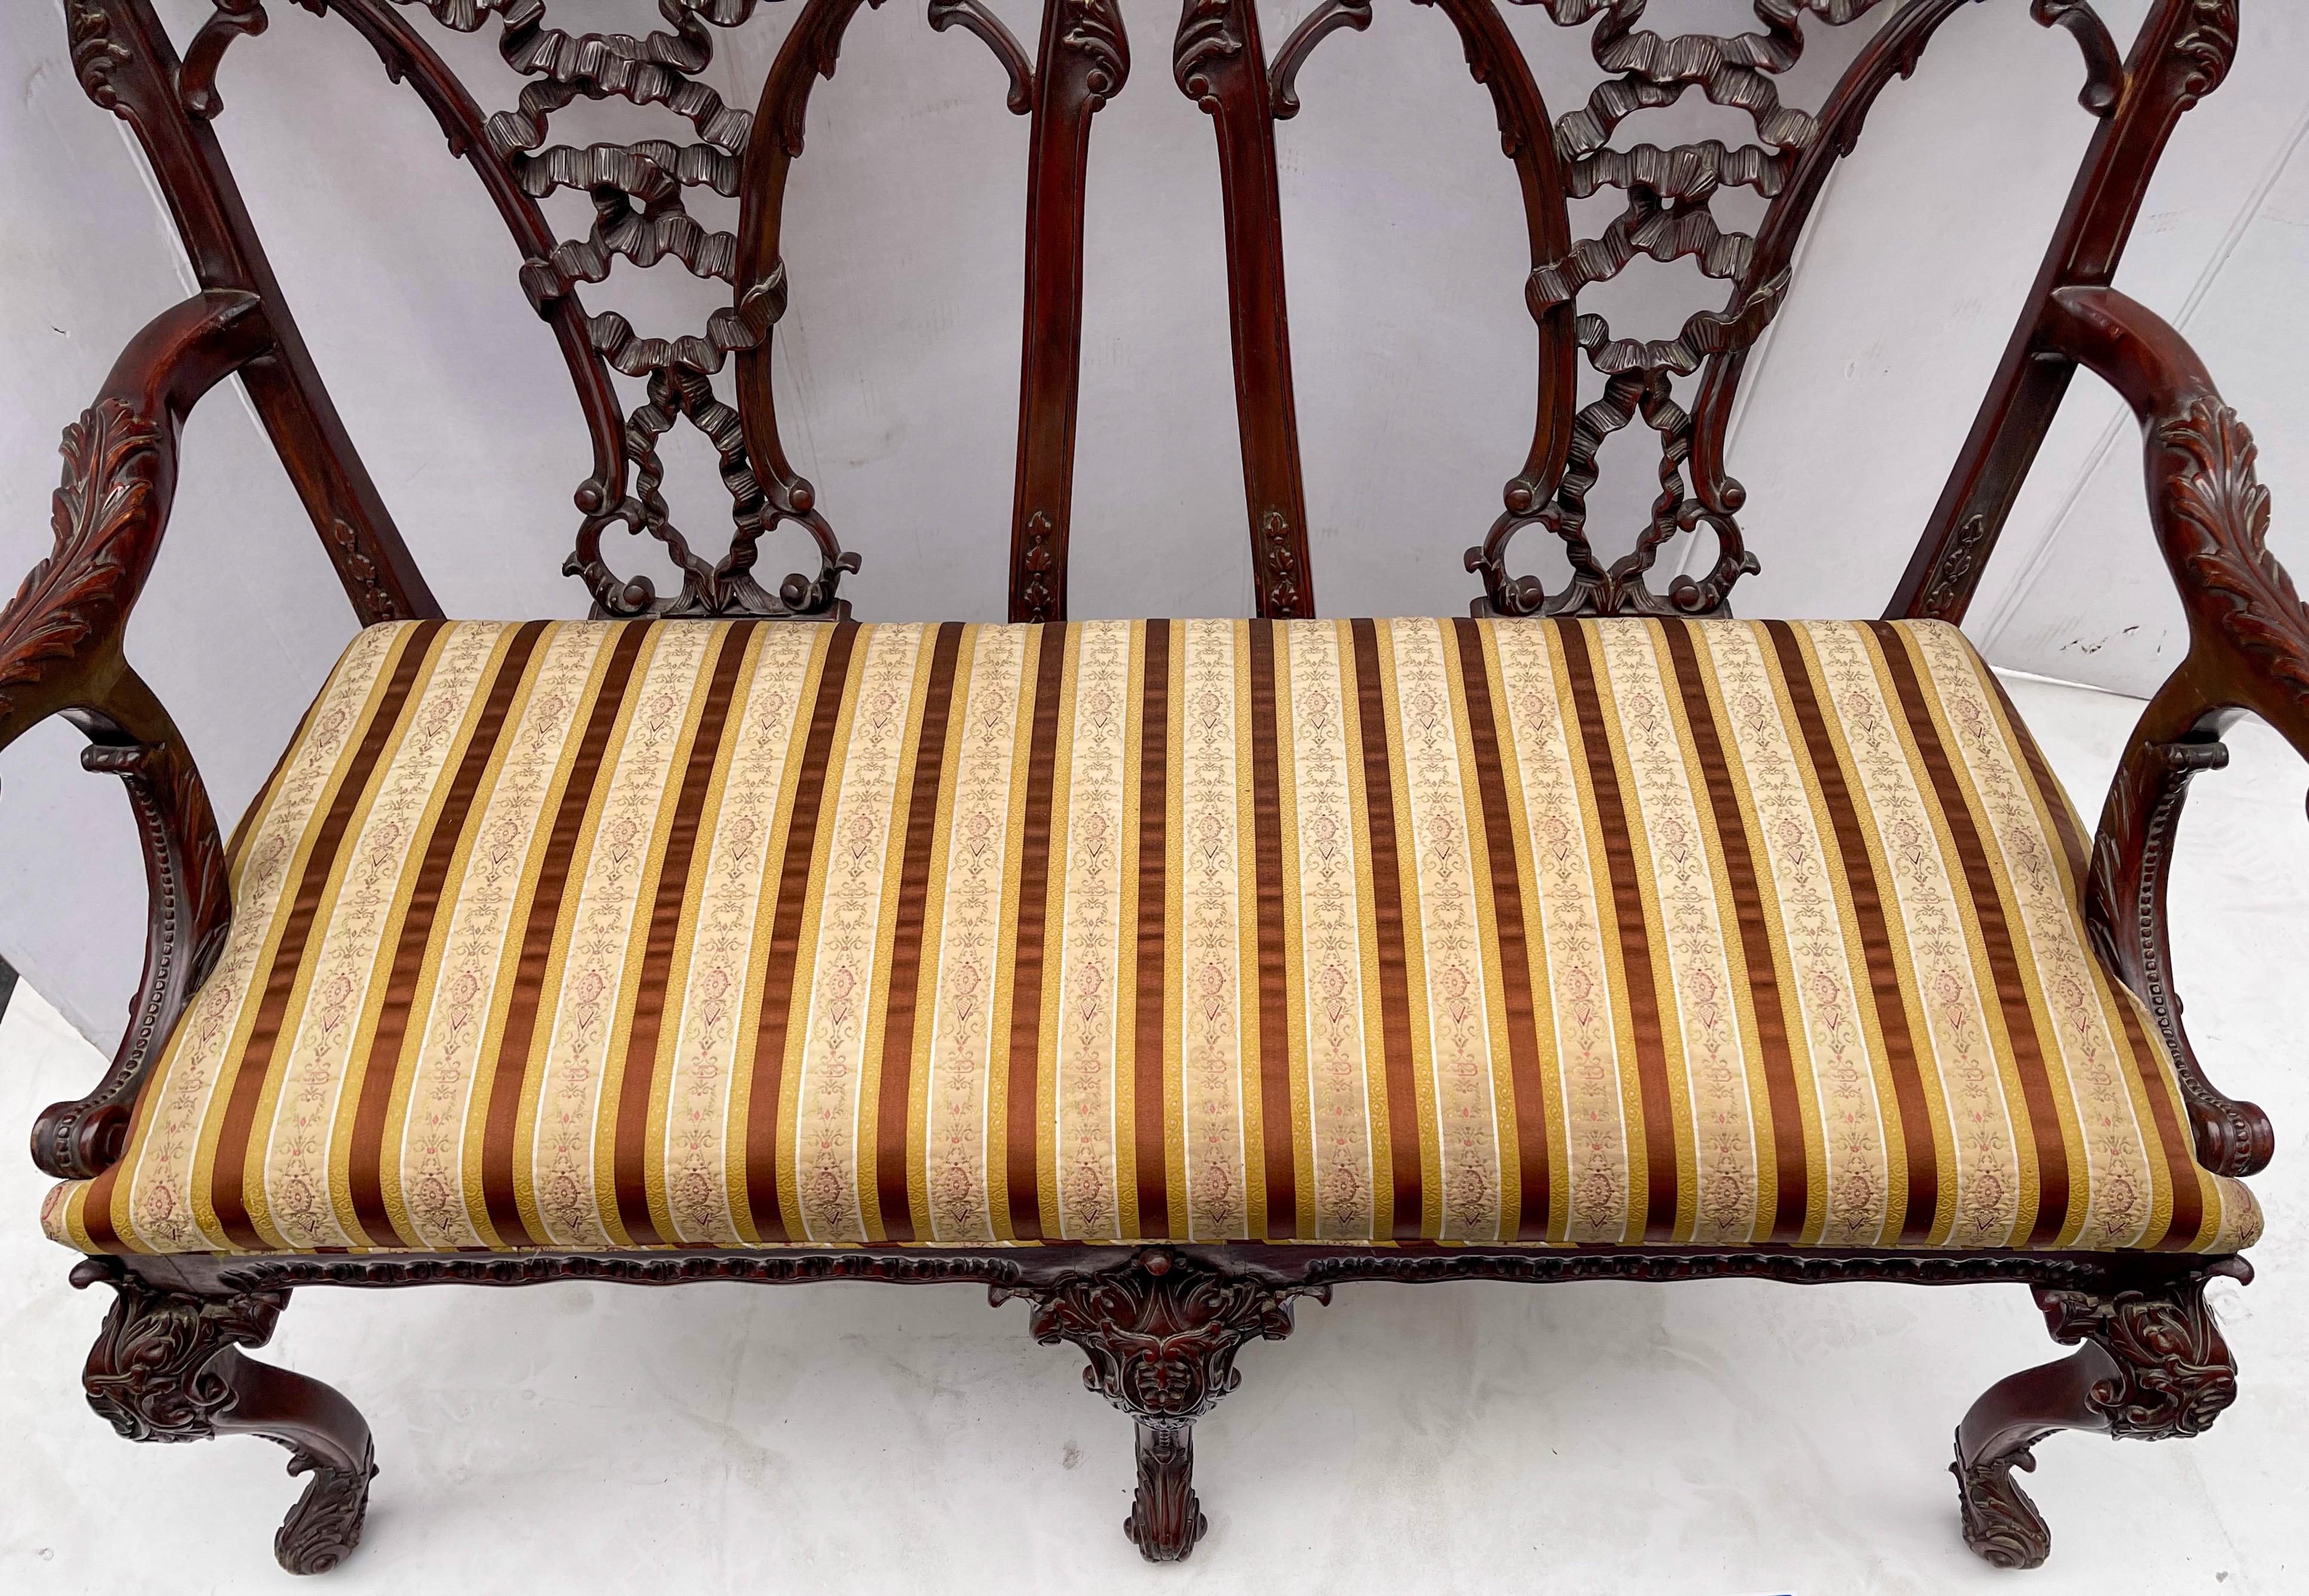 Early 20th-C. English Chinese Chippendale Style Carved Mahogany Settee / Bench  For Sale 4